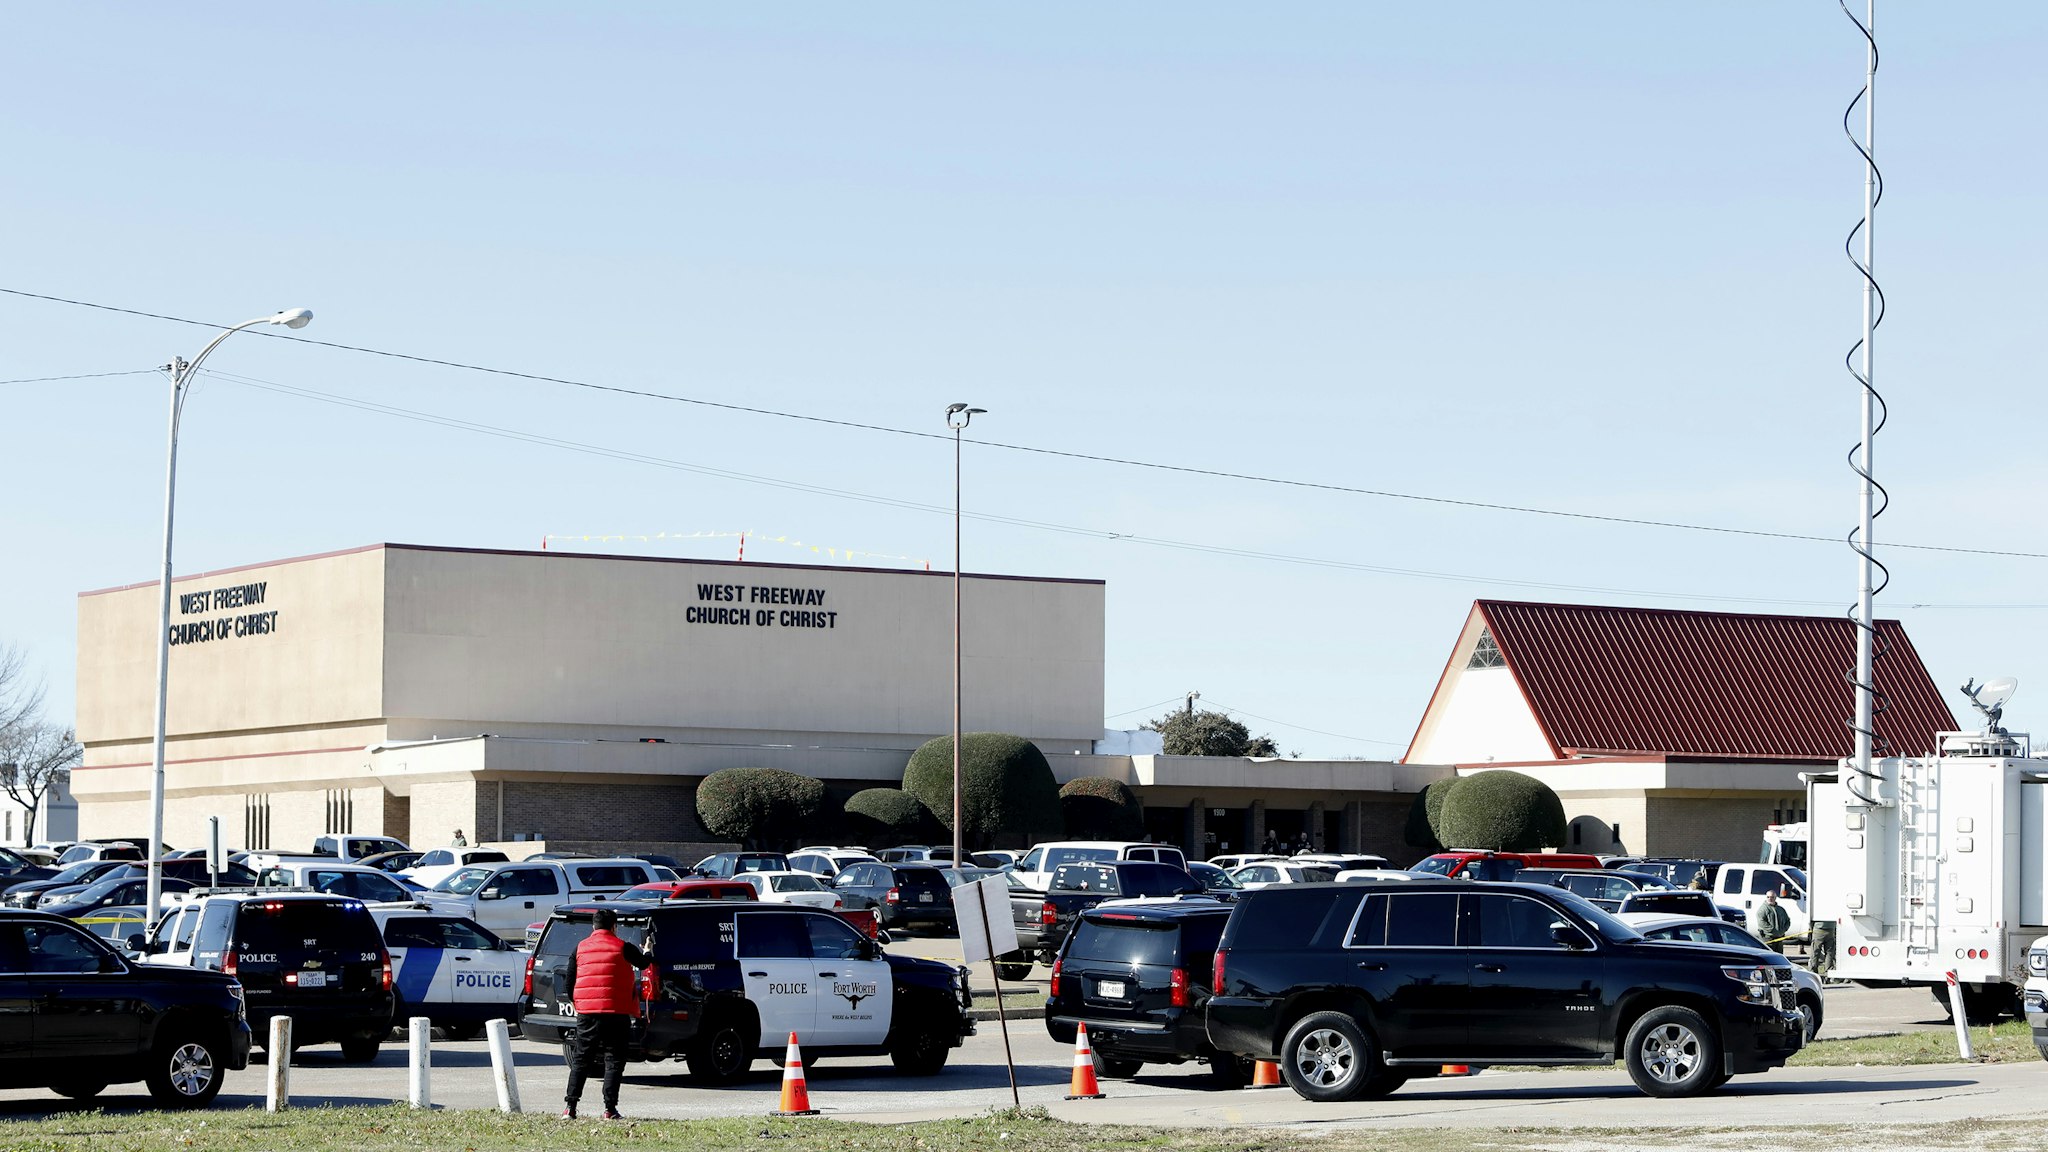 WHITE SETTLEMENT, TX - DECEMBER 29: Law enforcement and the media work outside the West Freeway Church of Christ after a shooting took place during services on December 29, 2019 in White Settlement, Texas. The gunman was killed by armed members of the church after he opened fire during Sunday services. According to reports, a security guard was killed by the assailant and one other person has life-threatening injuries.